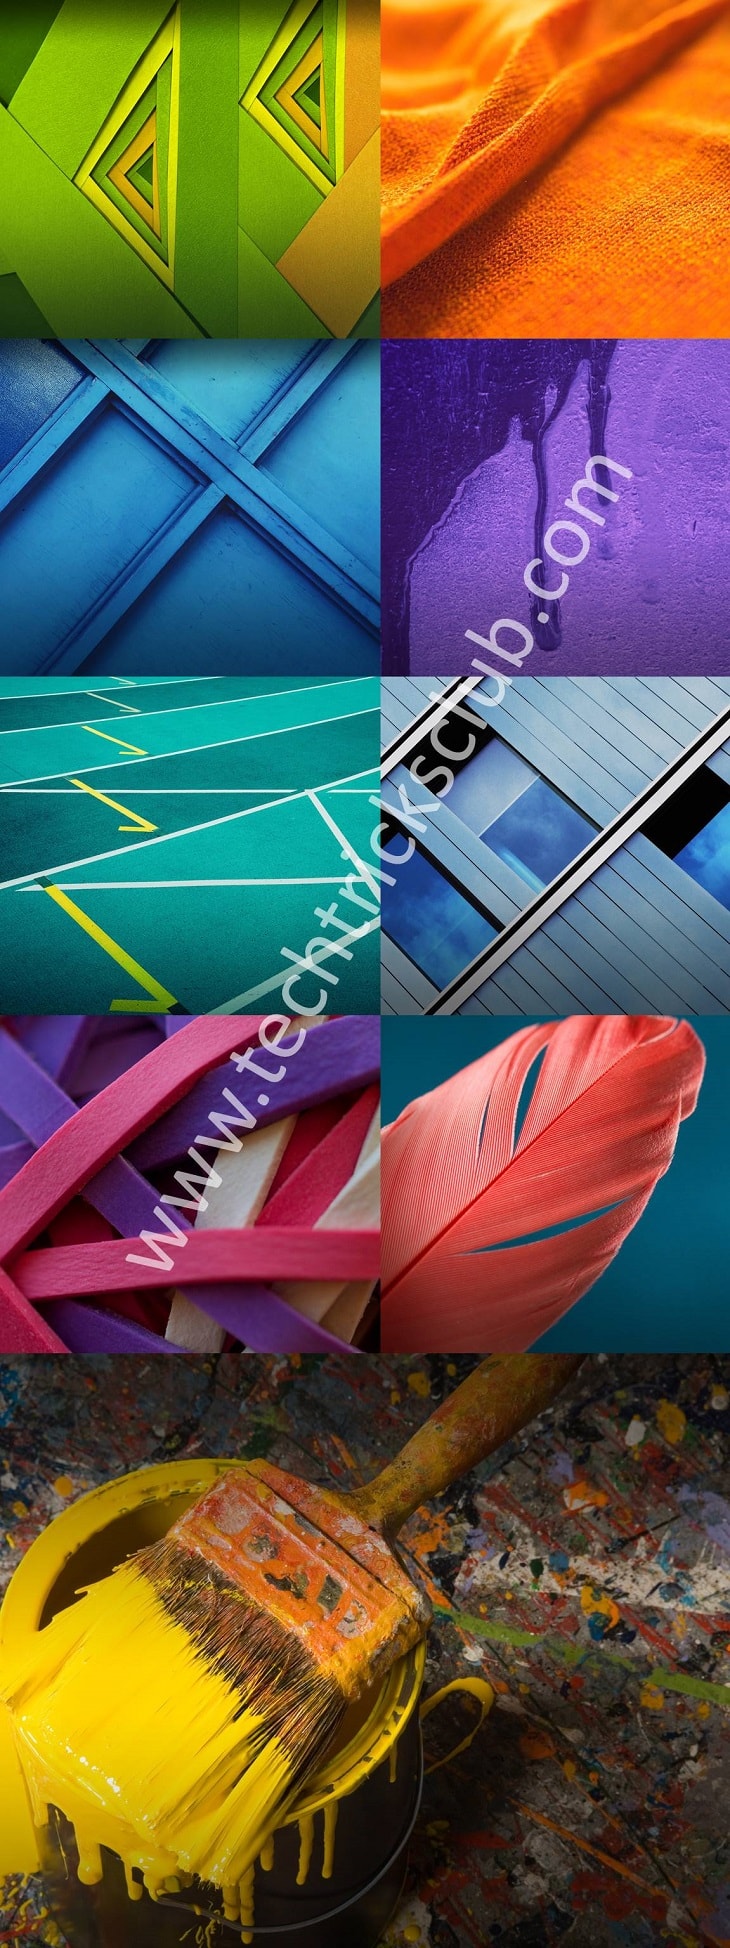 This Is The Stock Wallpaper For New Motorola Moto X Play